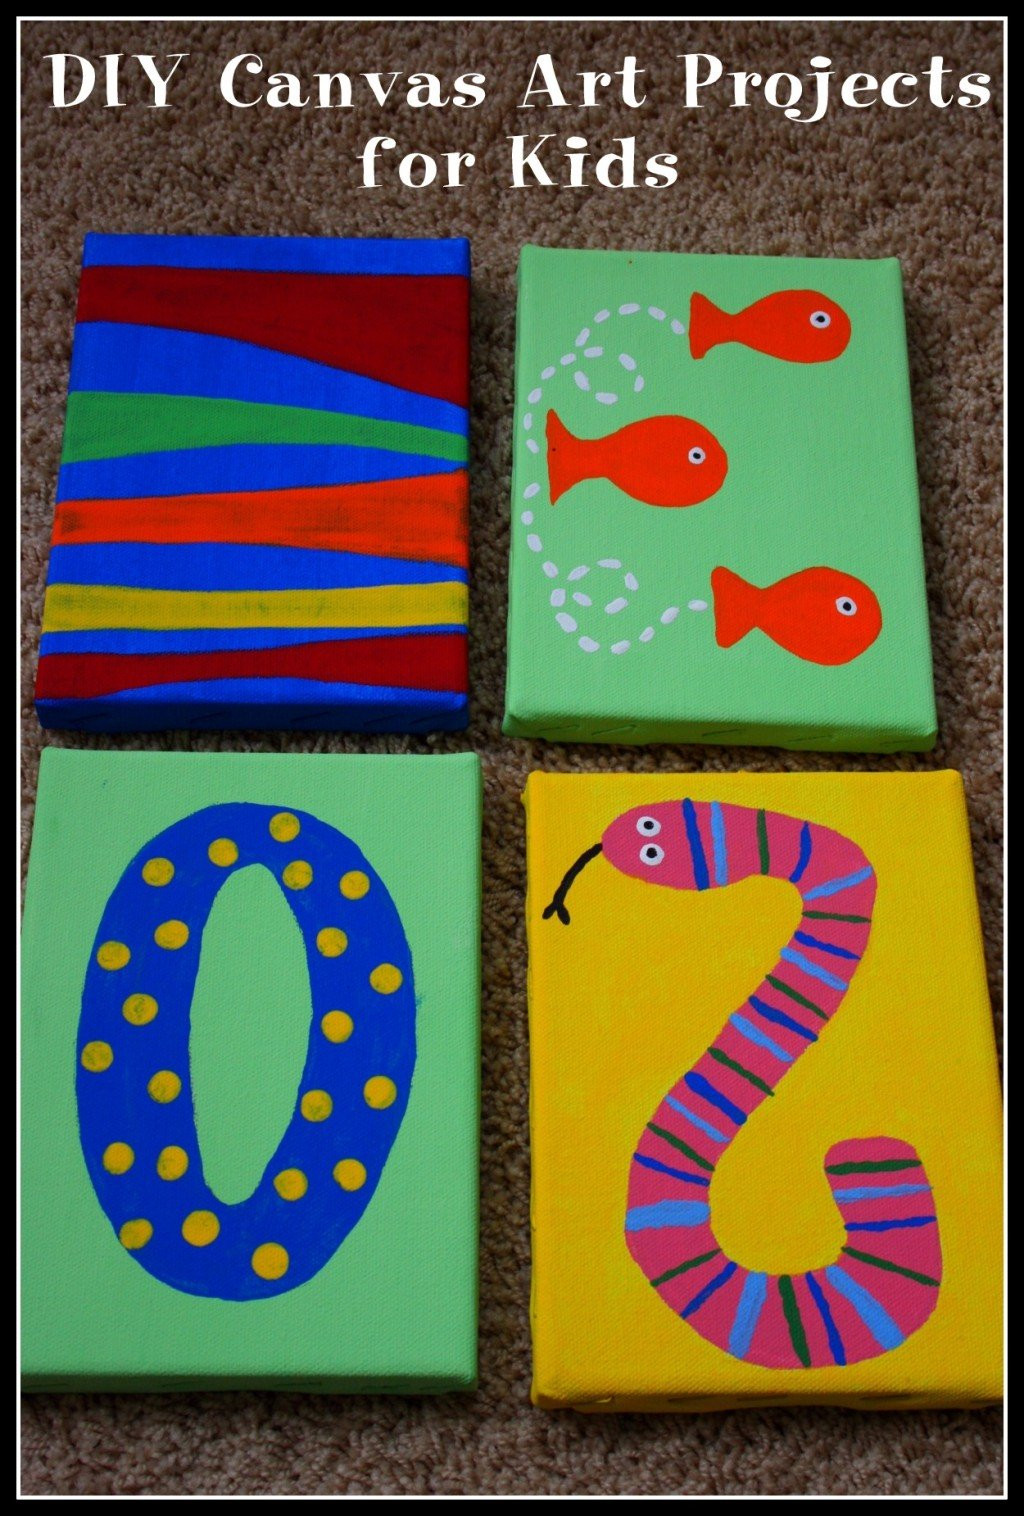 Canvas Crafts For Toddlers
 DIY Canvas Art Projects for Kids